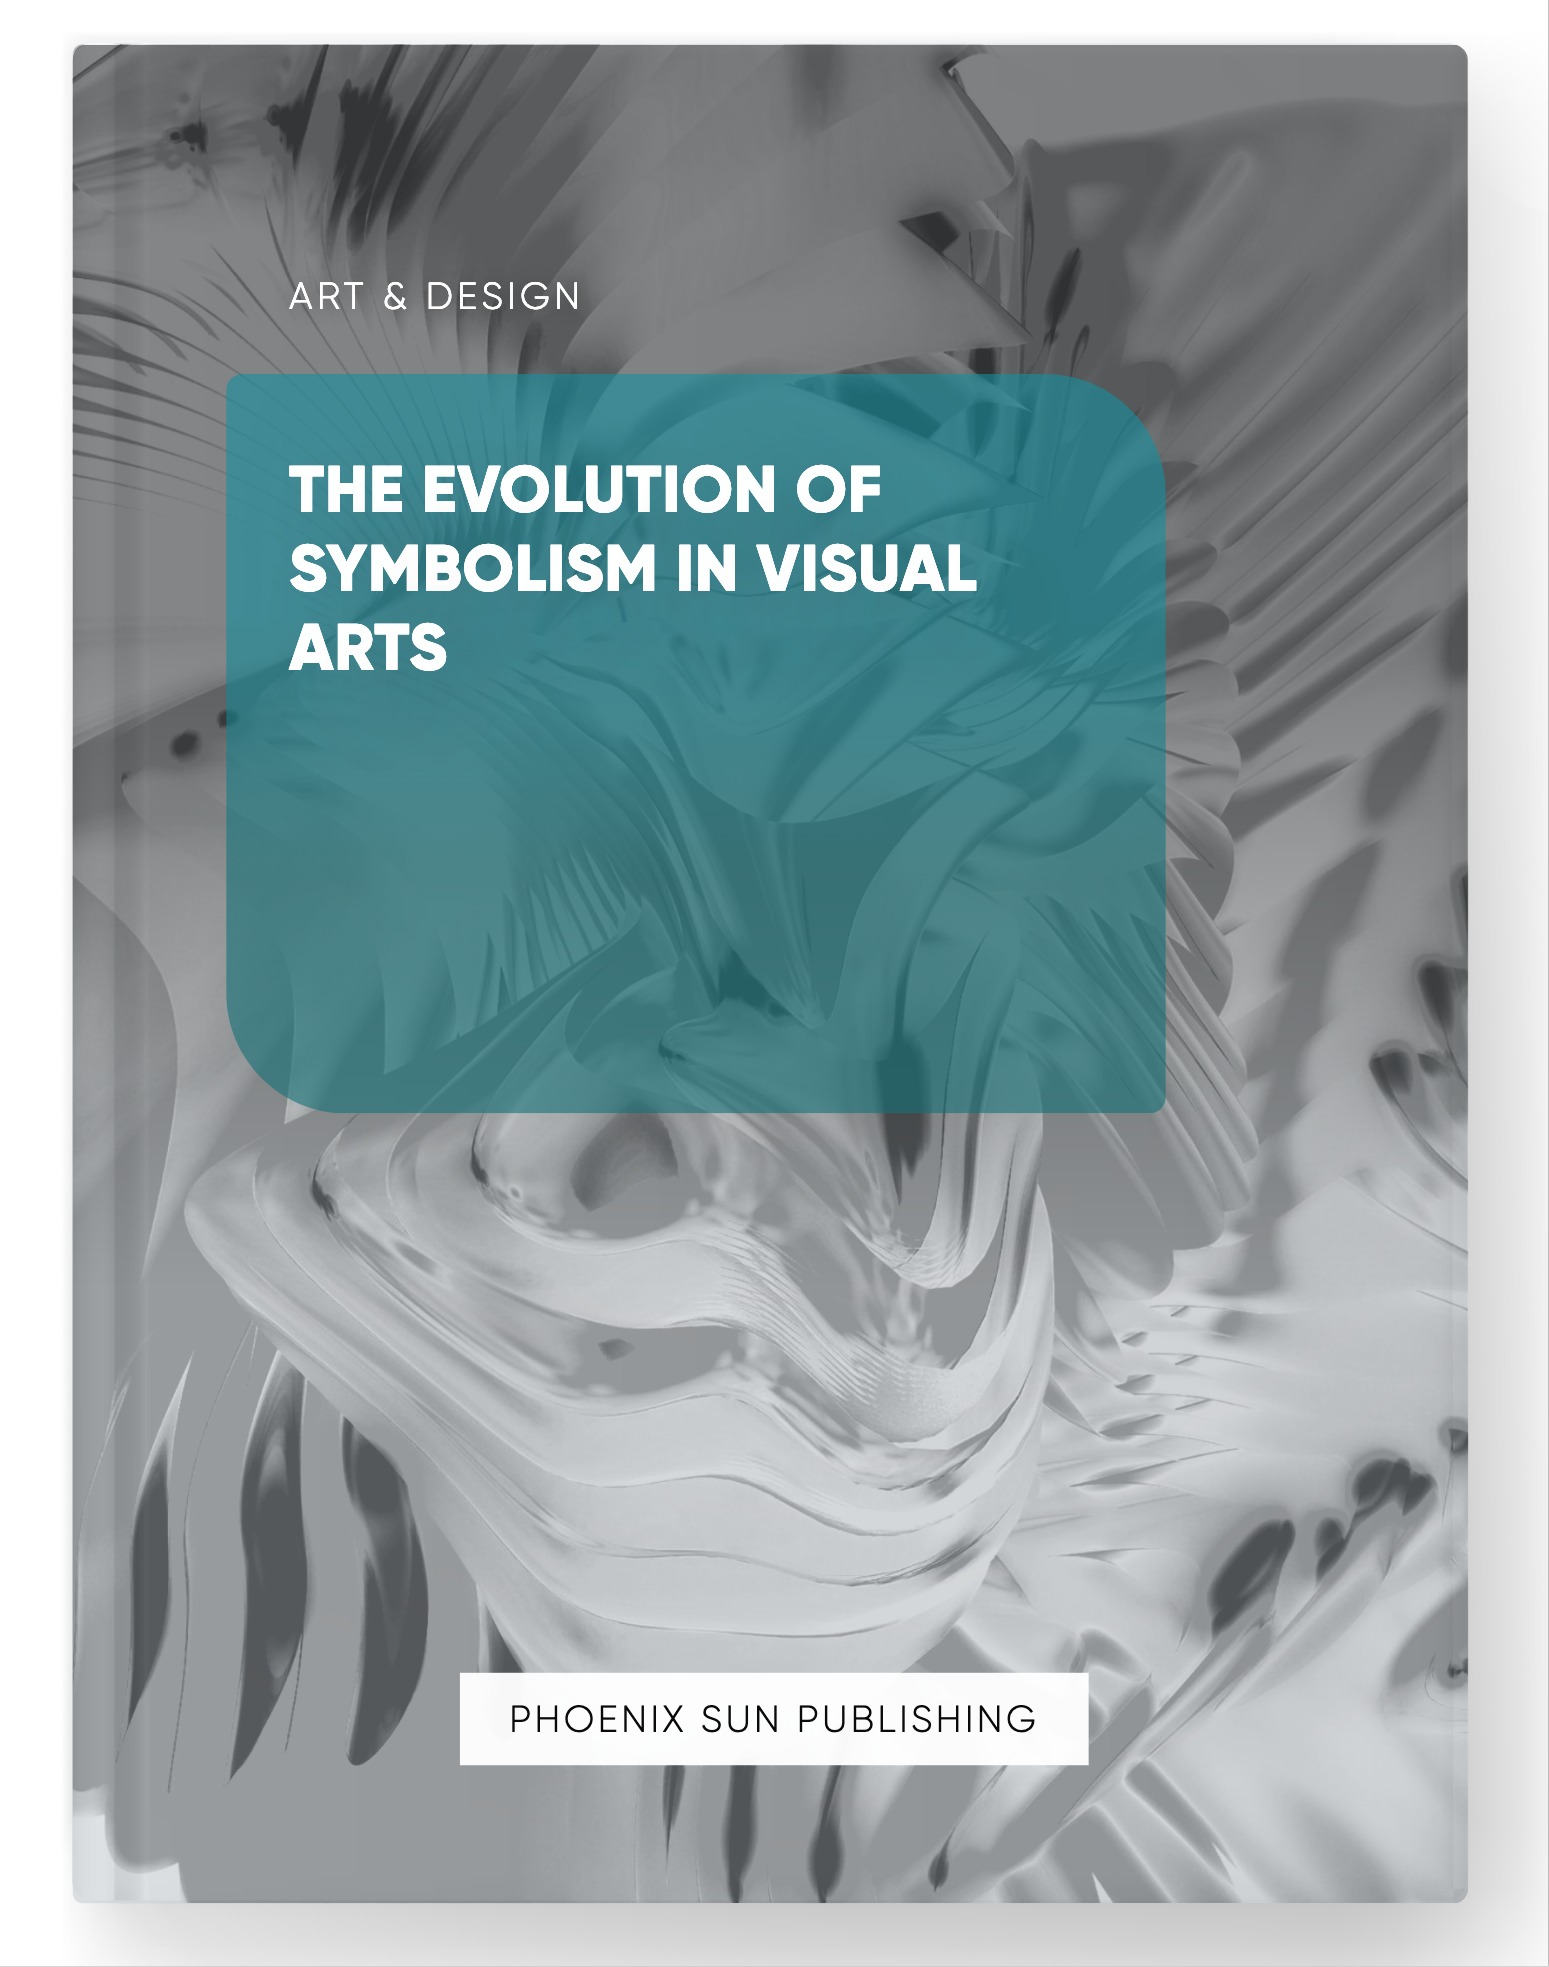 The Evolution of Symbolism in Visual Arts